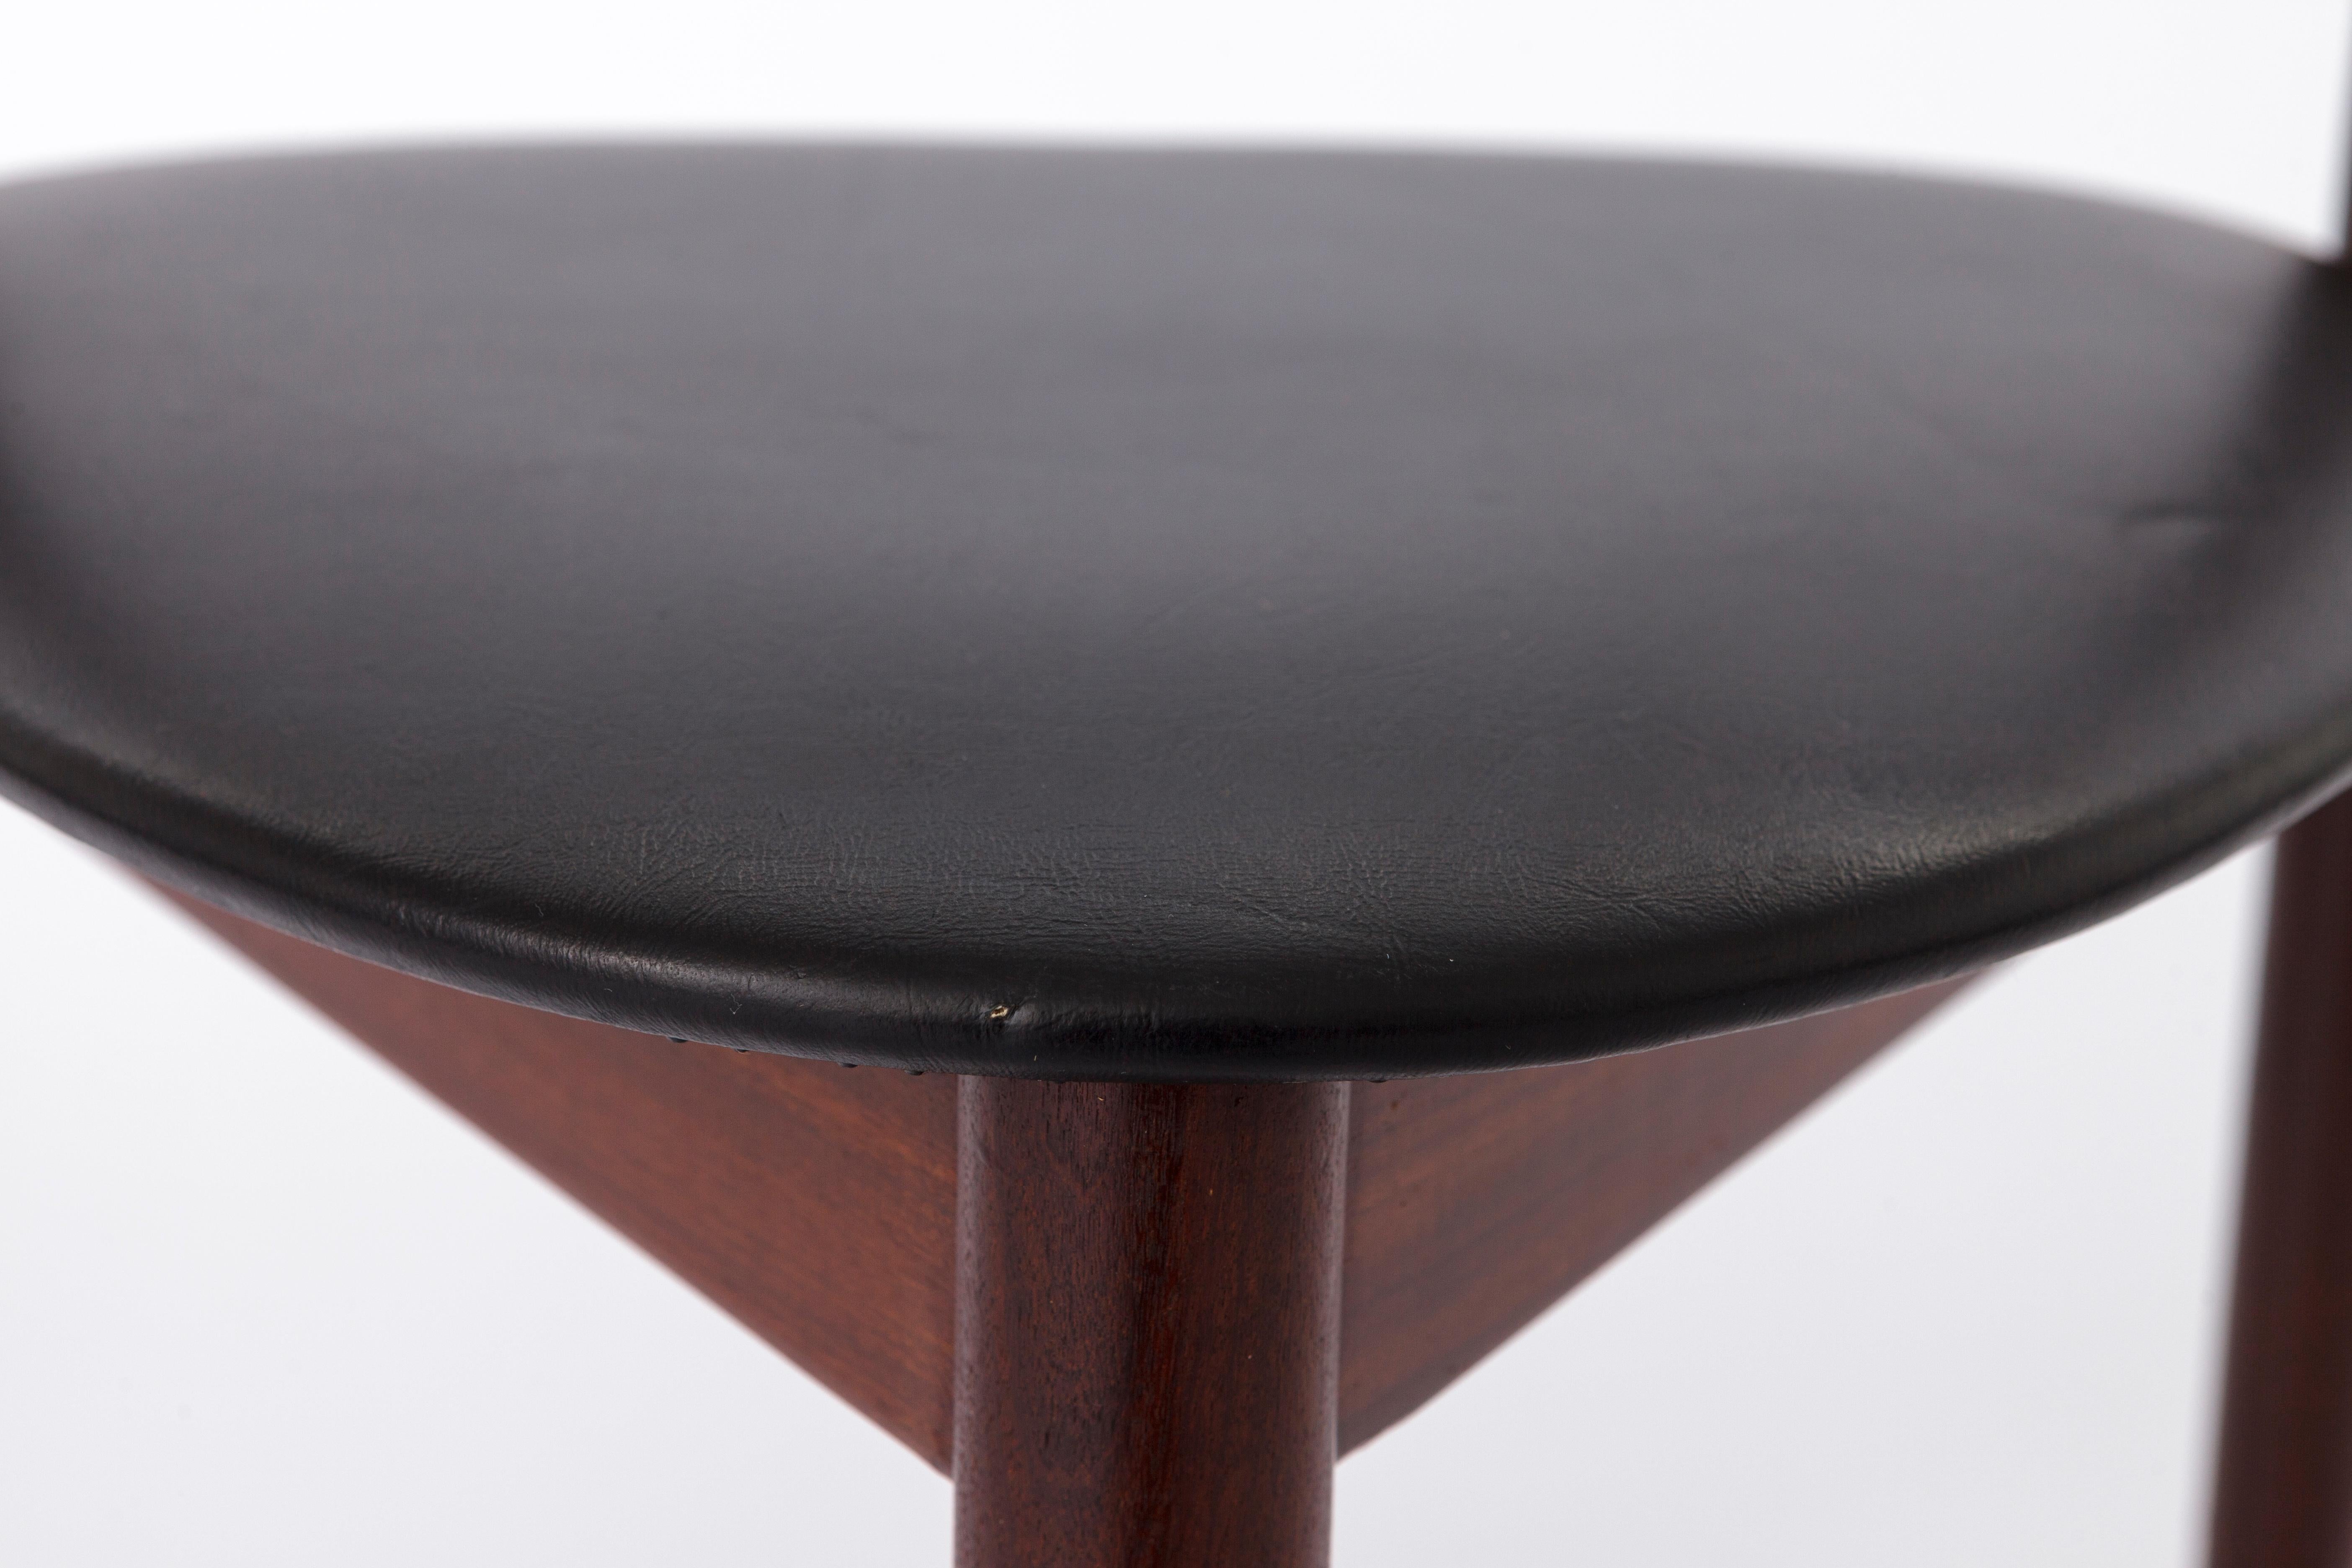 A three legged vintage chair from the 1960s by Hans Olsen for manufacturer Frem Røjle. 
Displayed price is for 1 chair. Totally 2 chairs available. 

Sturdy teak wood frame. Original seat cover, made of black artificial leather. 
Manufacter's mark